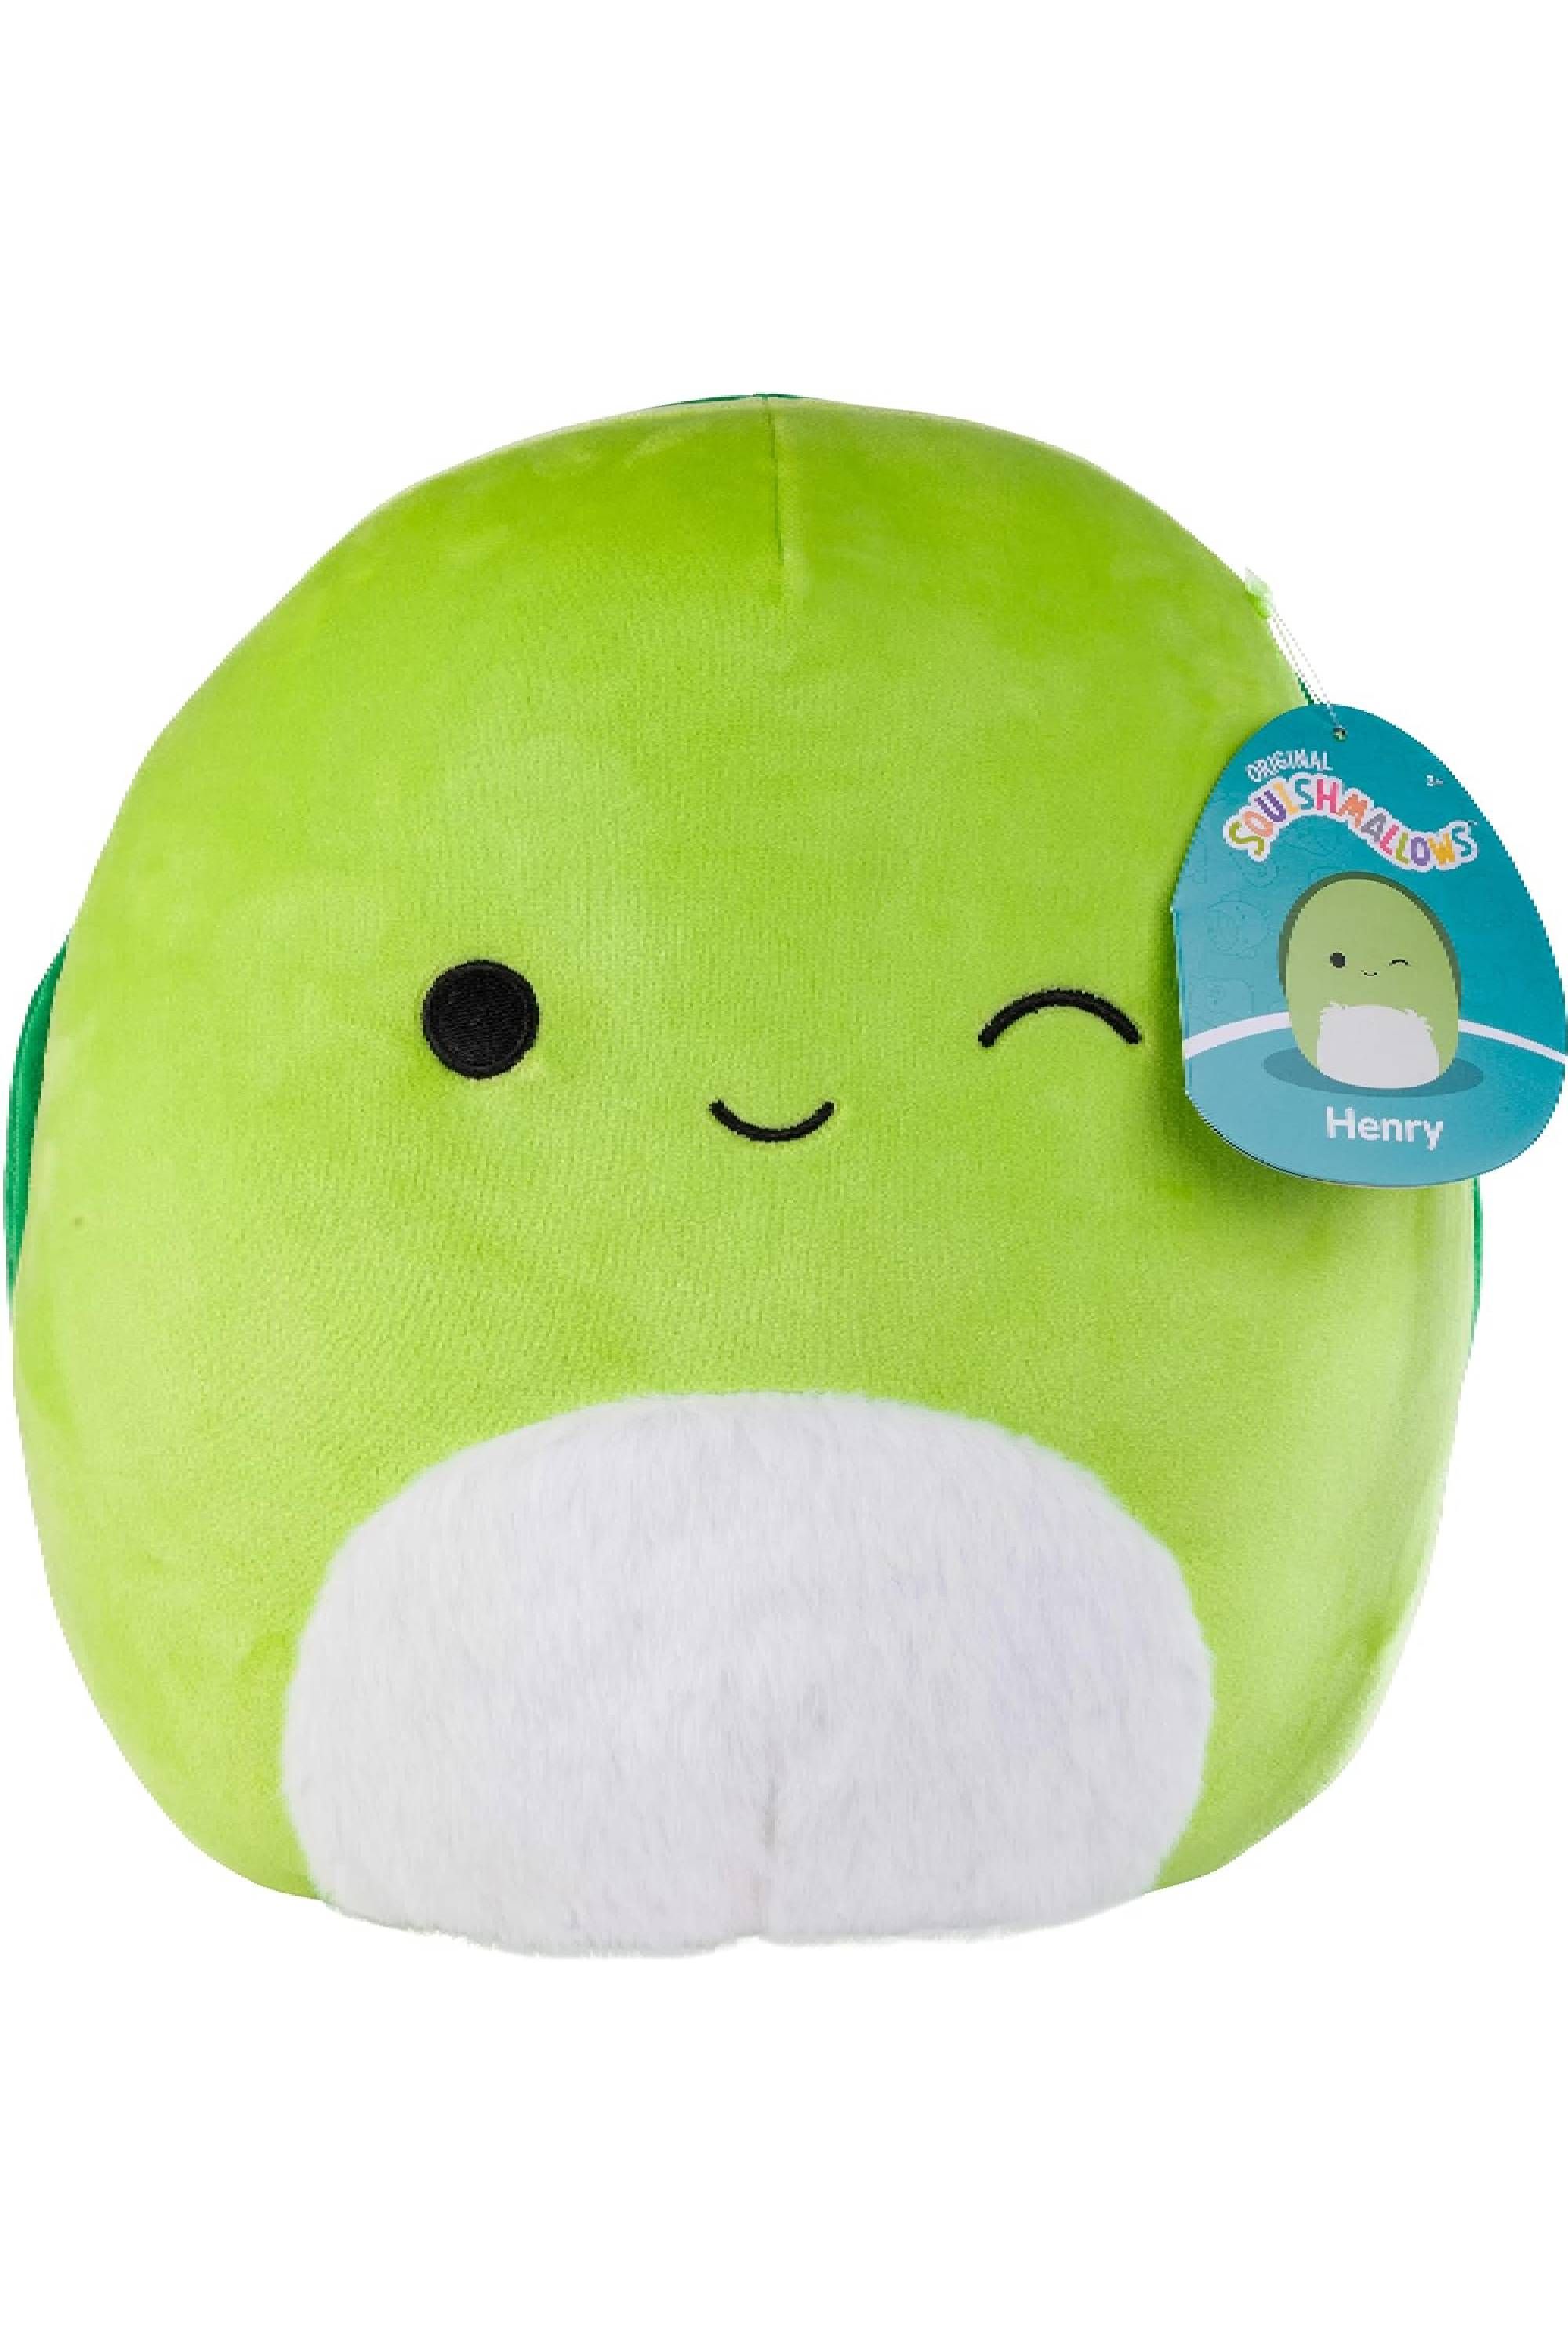 Squishmallows Cyber Monday Deals Are Selling Out Extremely Fast